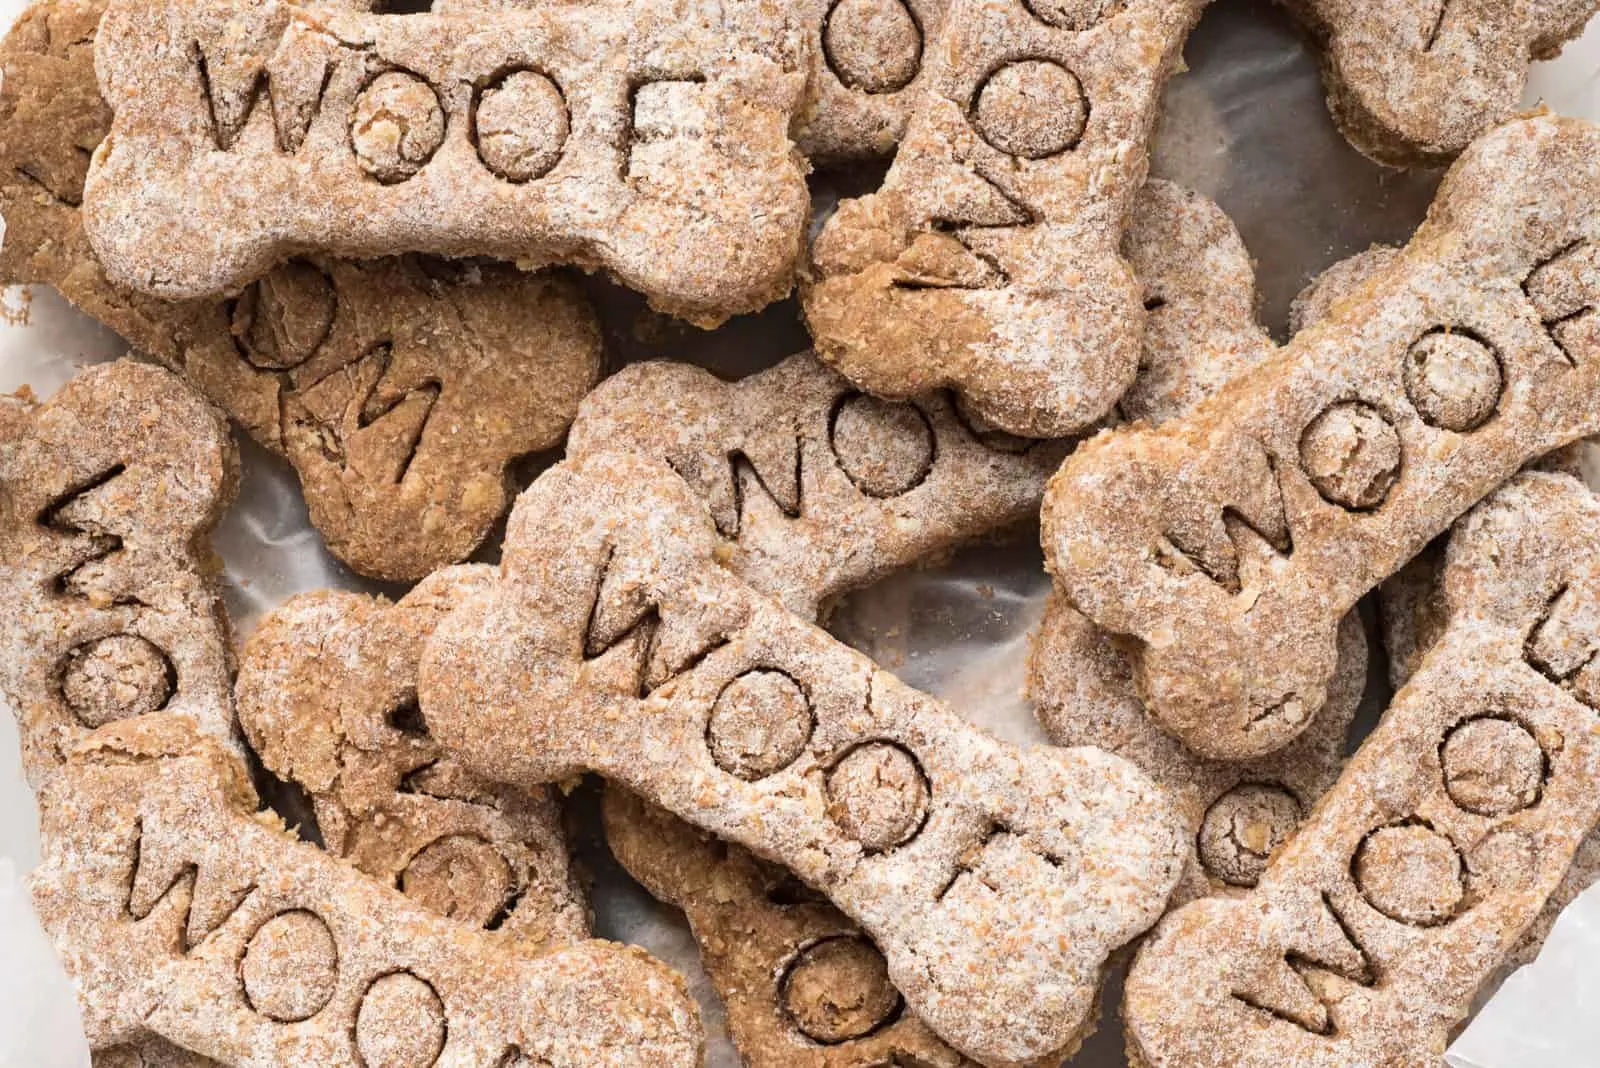 home made dog treats with the word Woof